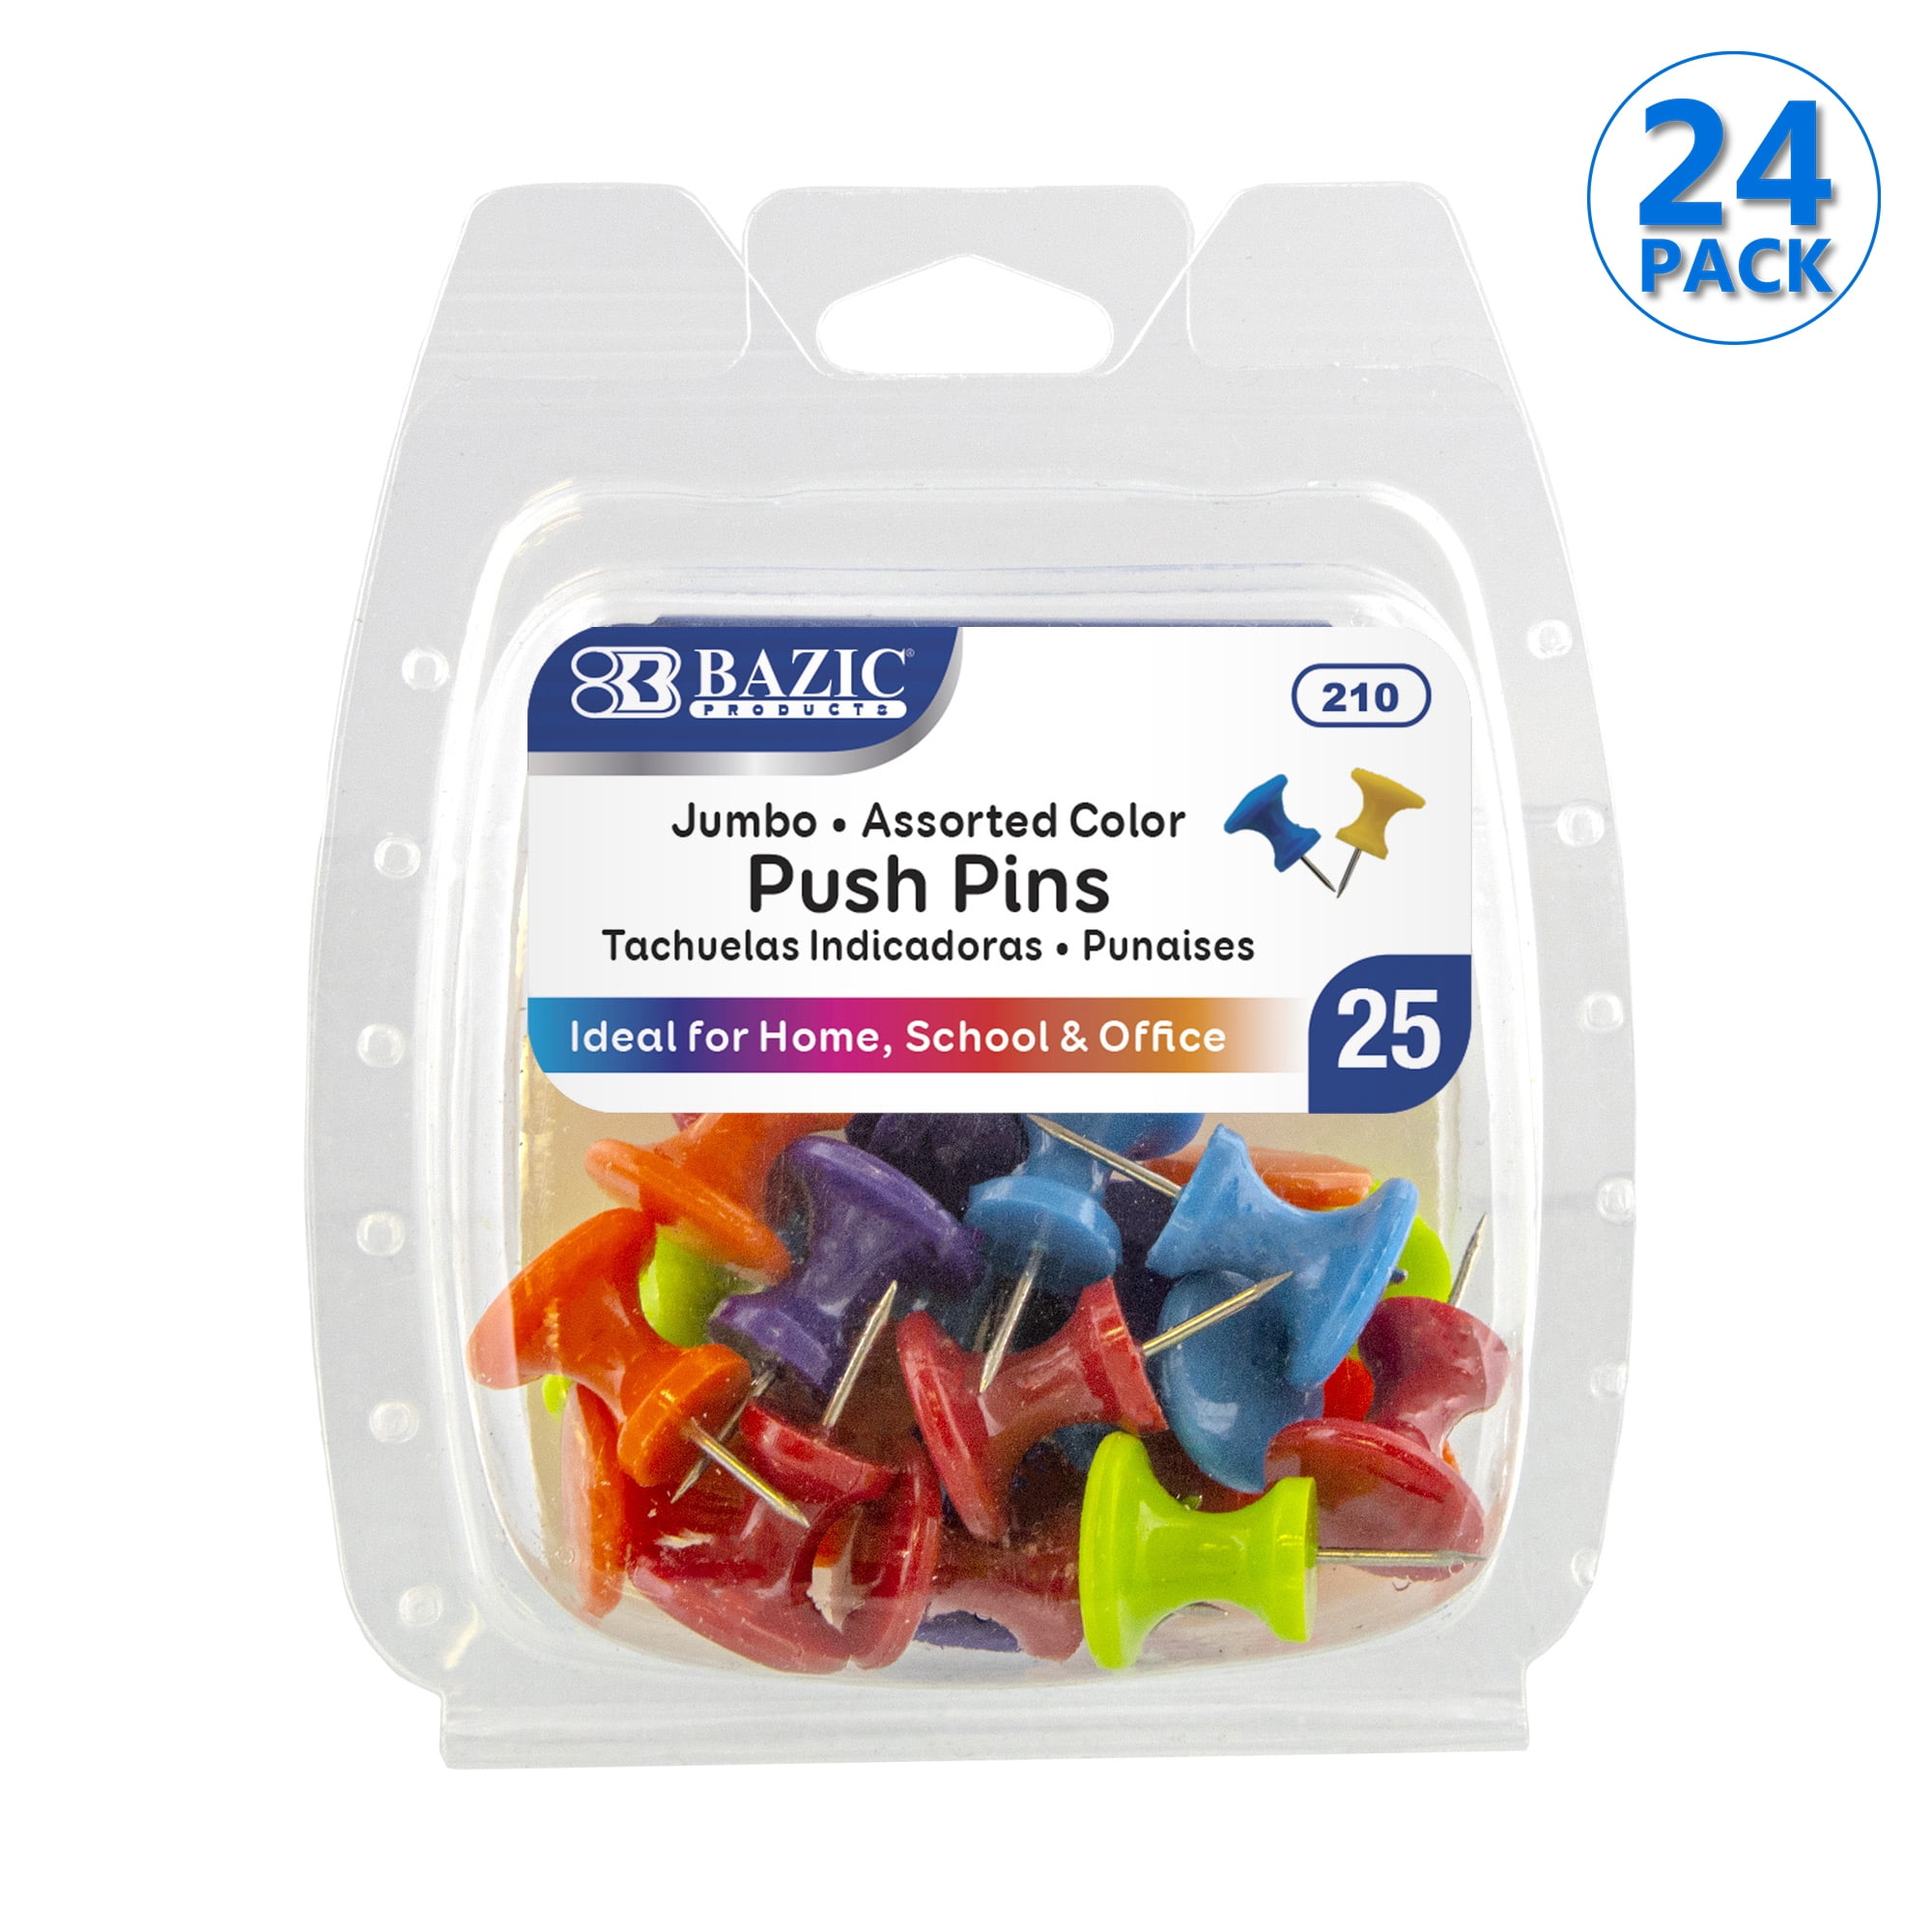 Bazic 100 pins/pack in Assorted Color Plastic Push Pins Bazic #206 